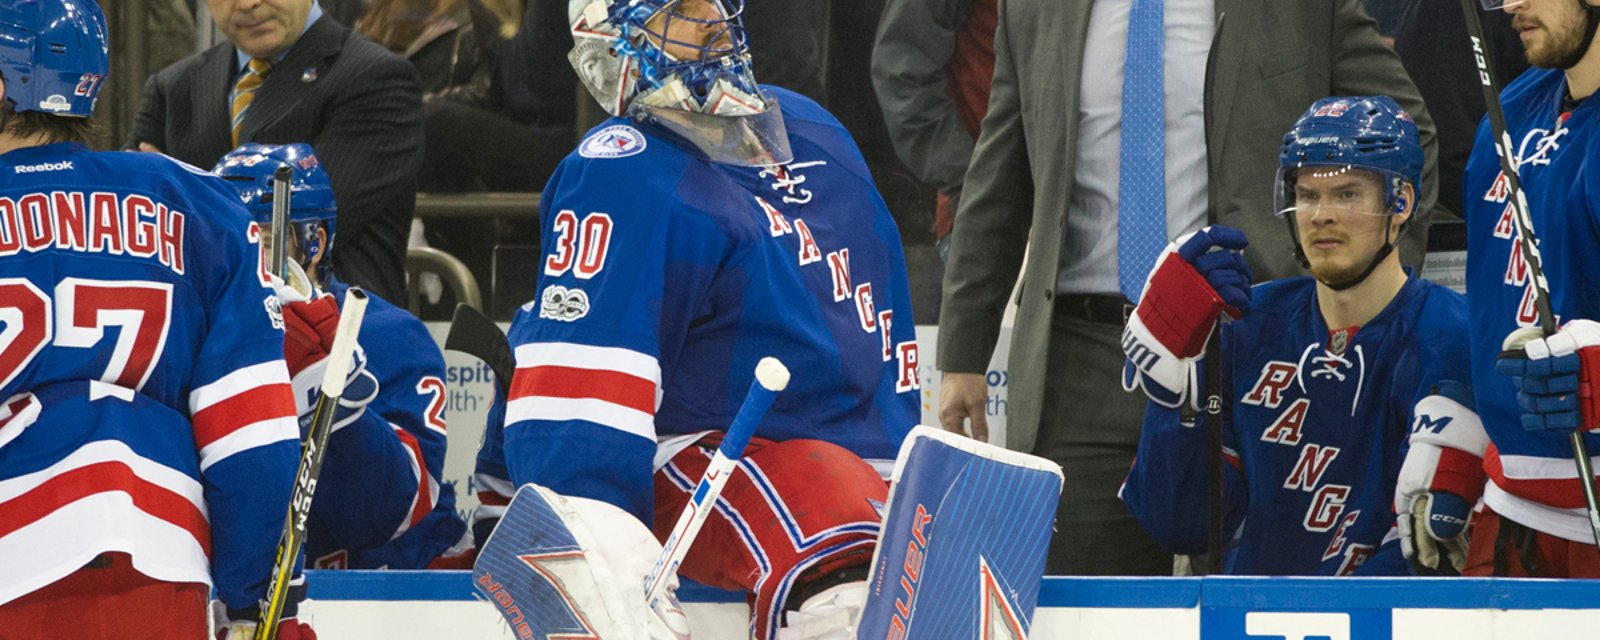 Report: Pavelec getting another start over Lundqvist